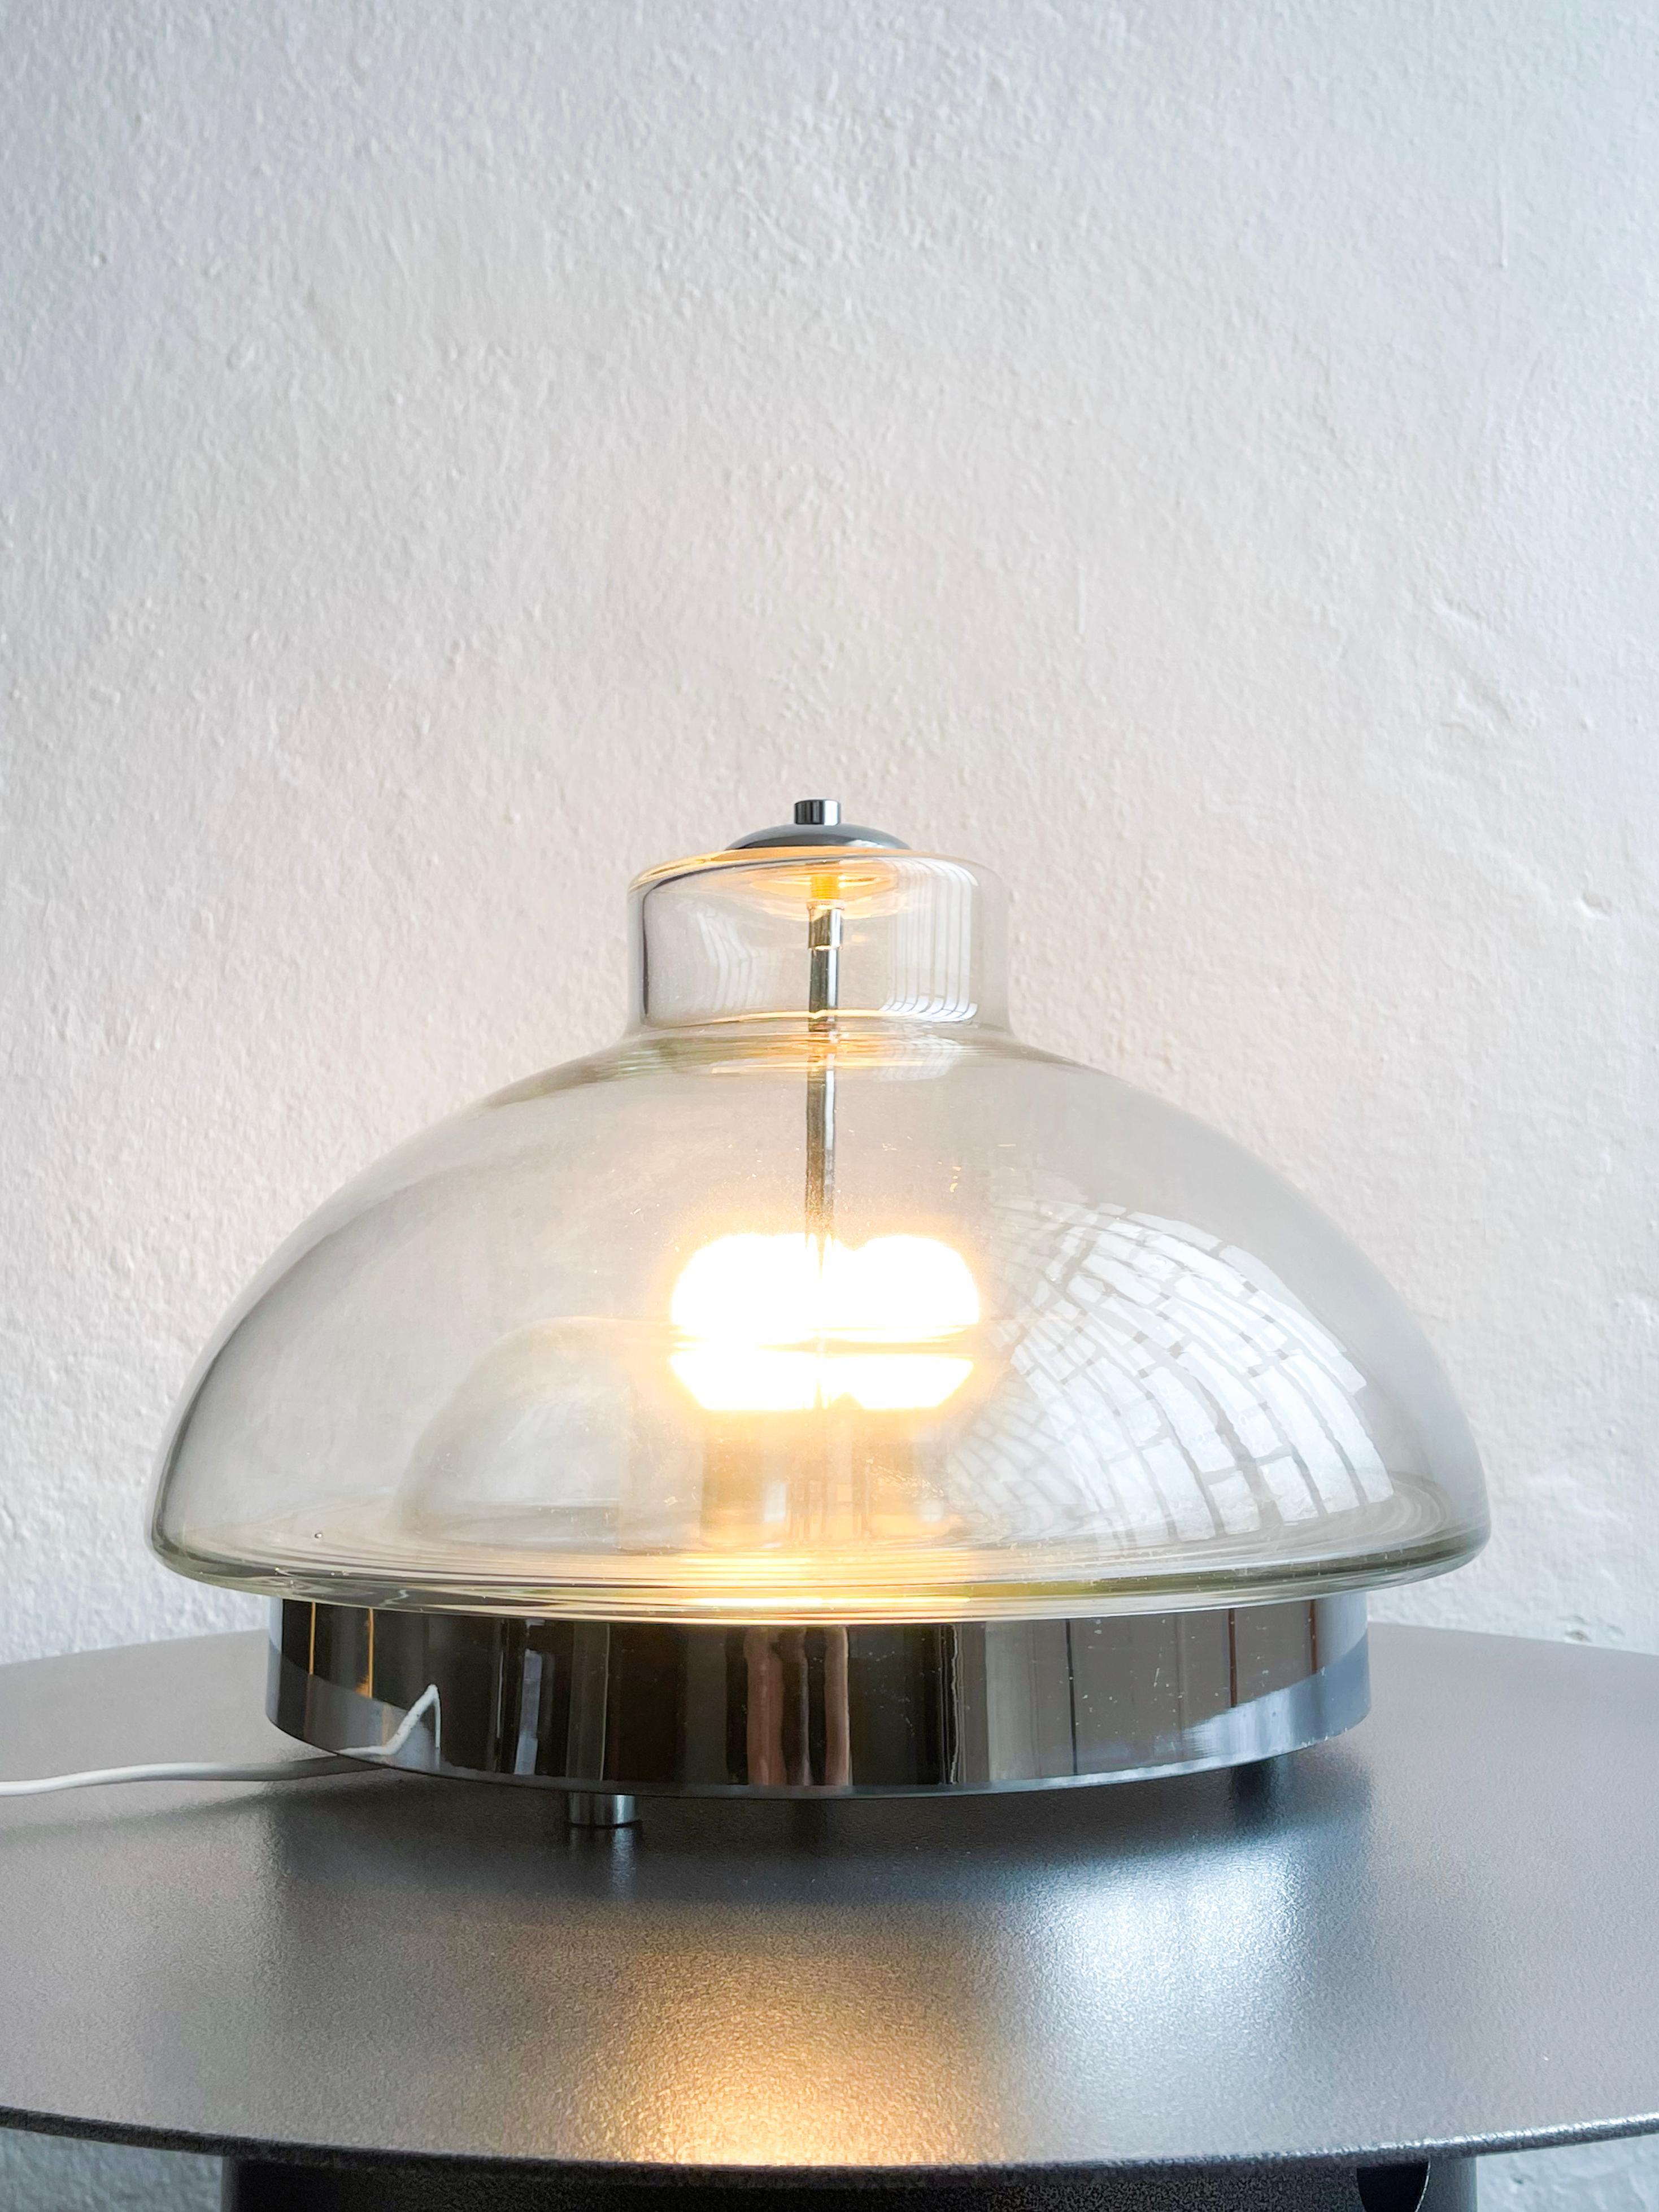 Decorative Living Room Lamp in Metal and Glass, Space Age, Italian Collectible For Sale 5